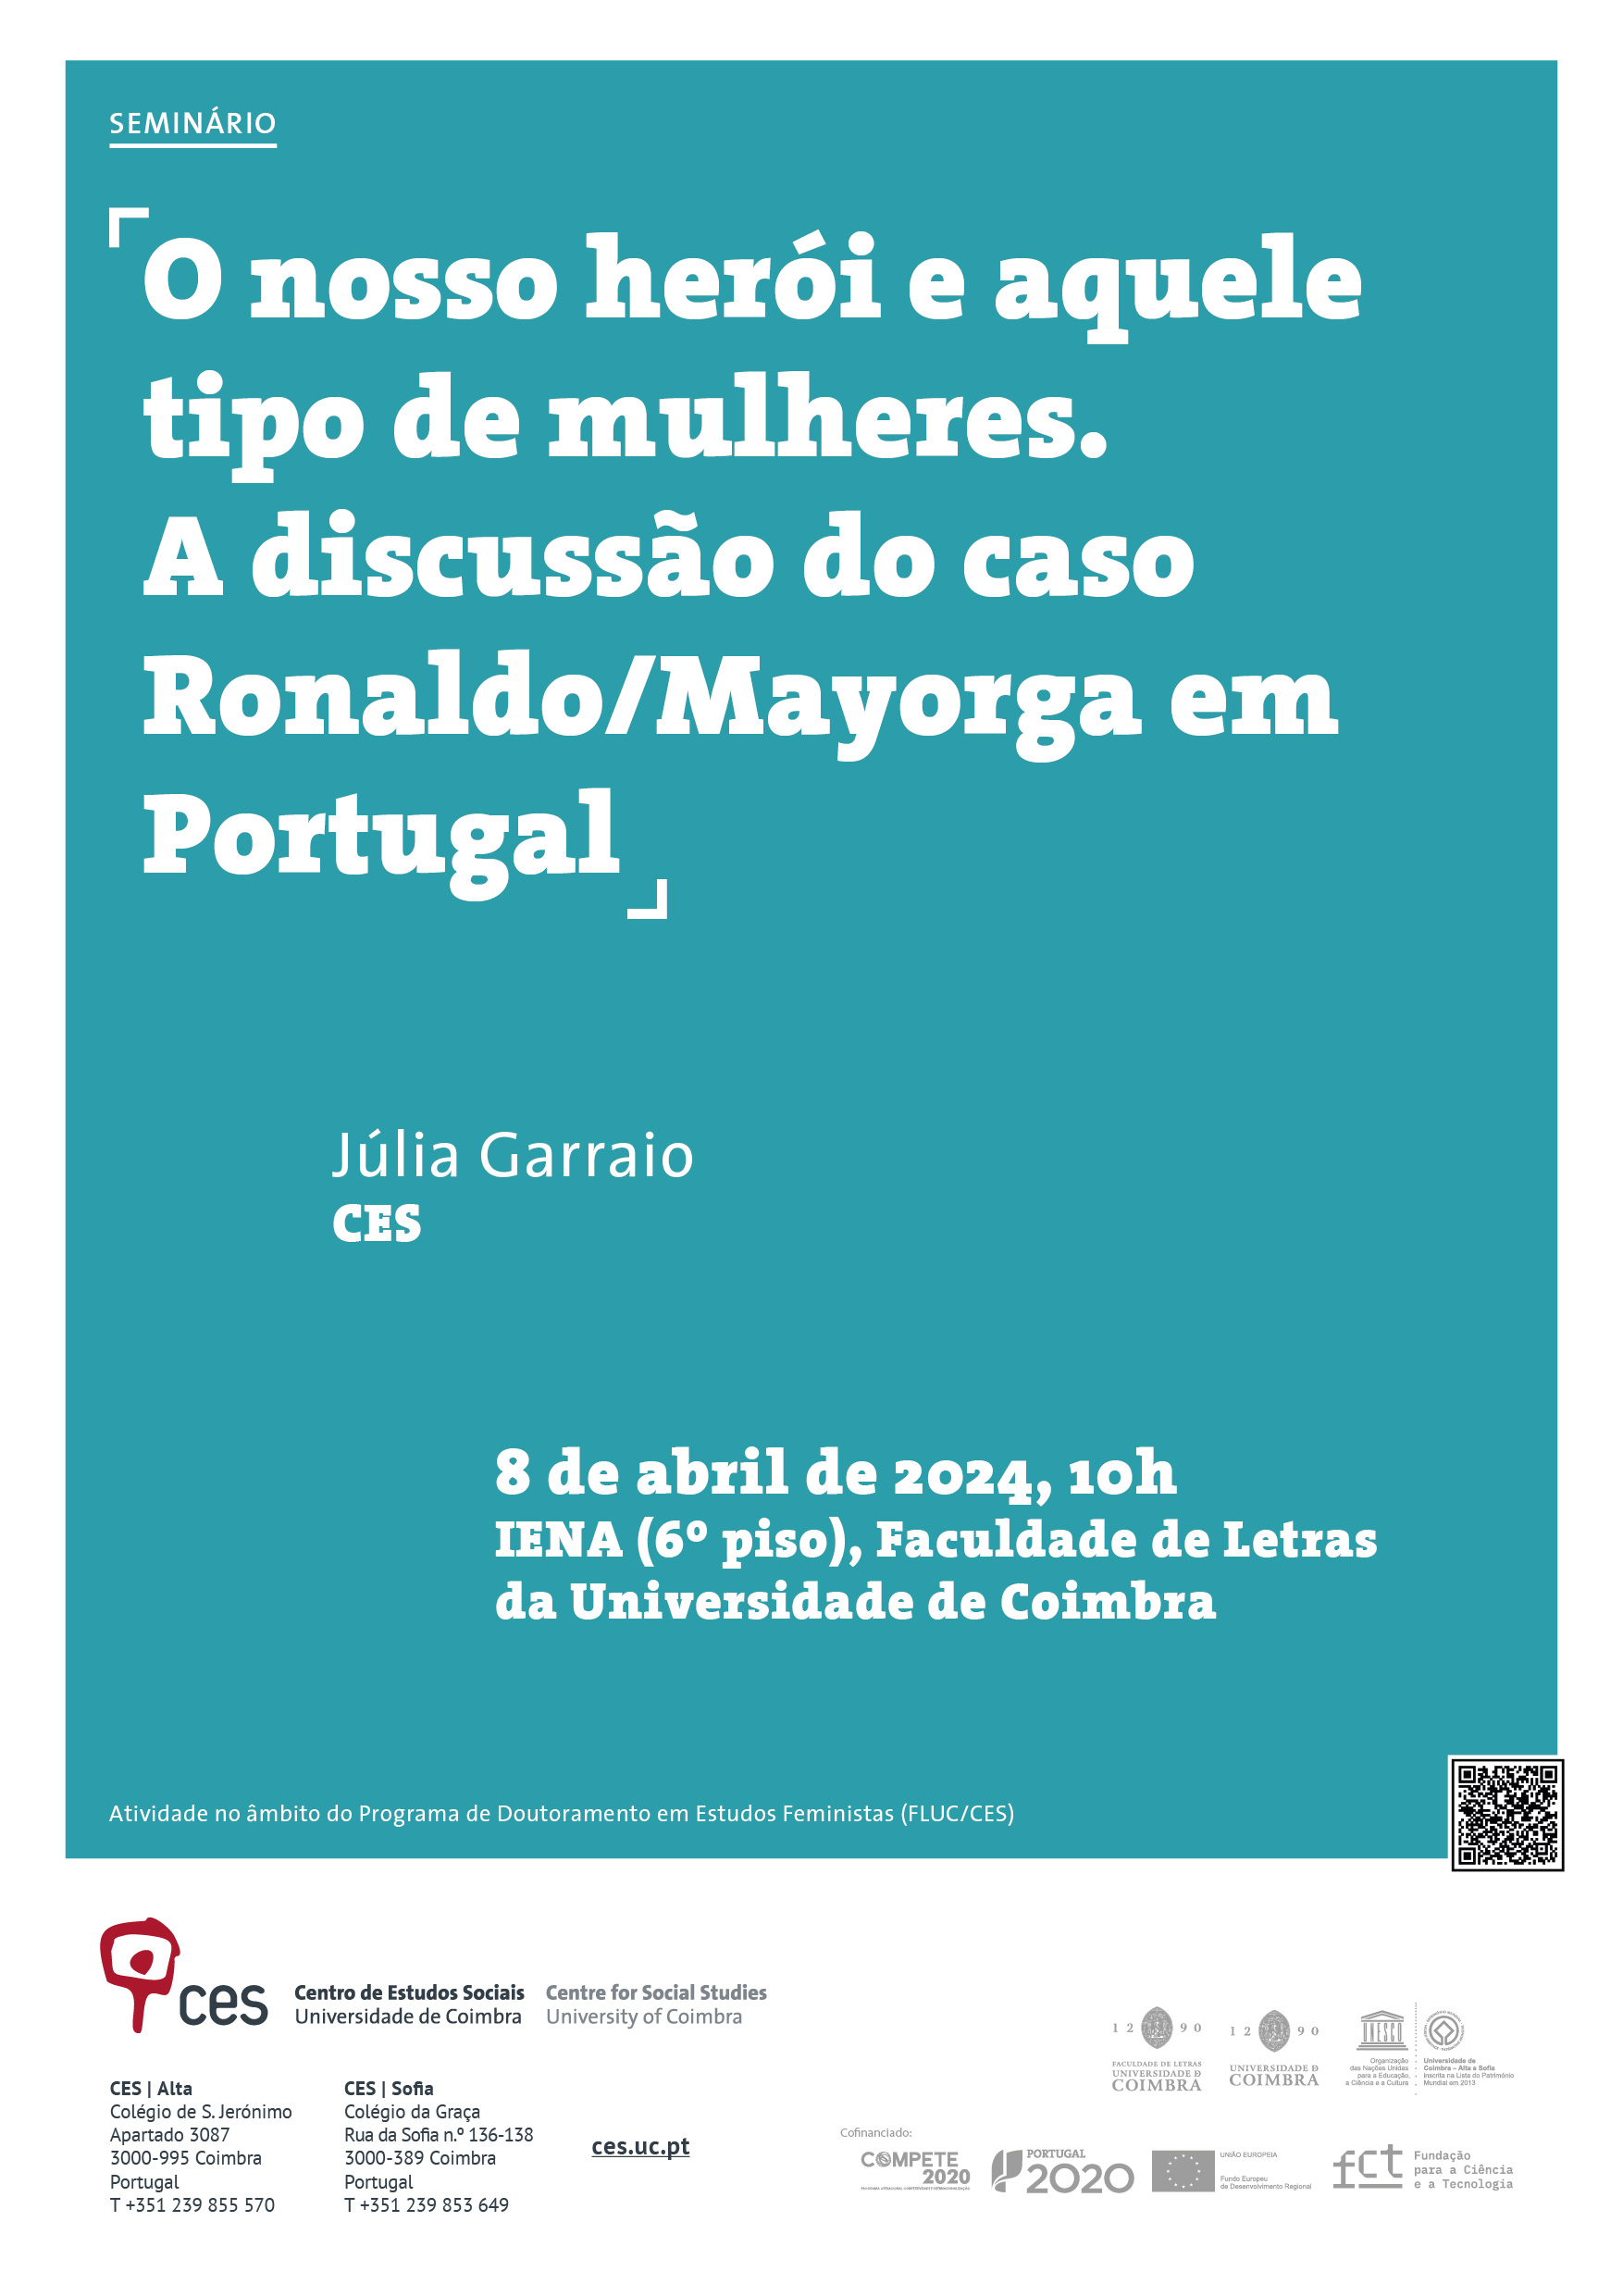 Our hero and that kind of woman. The discussion of the Ronaldo/Mayorga affair in Portugal <span id="edit_45350"><script>$(function() { $('#edit_45350').load( "/myces/user/editobj.php?tipo=evento&id=45350" ); });</script></span>